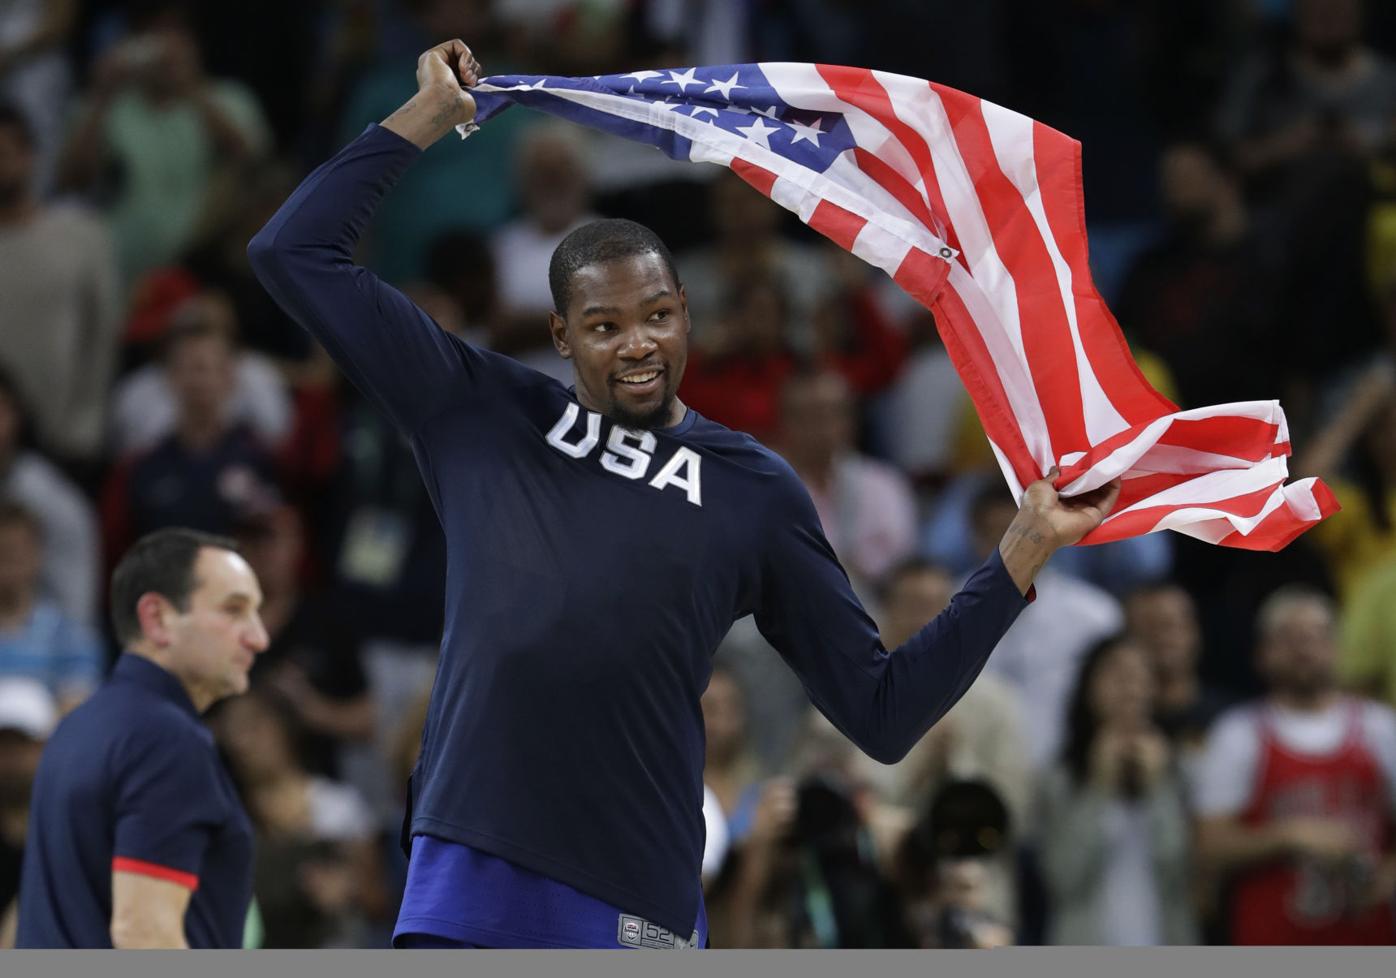 U.S. romps to men's basketball gold - The Columbian